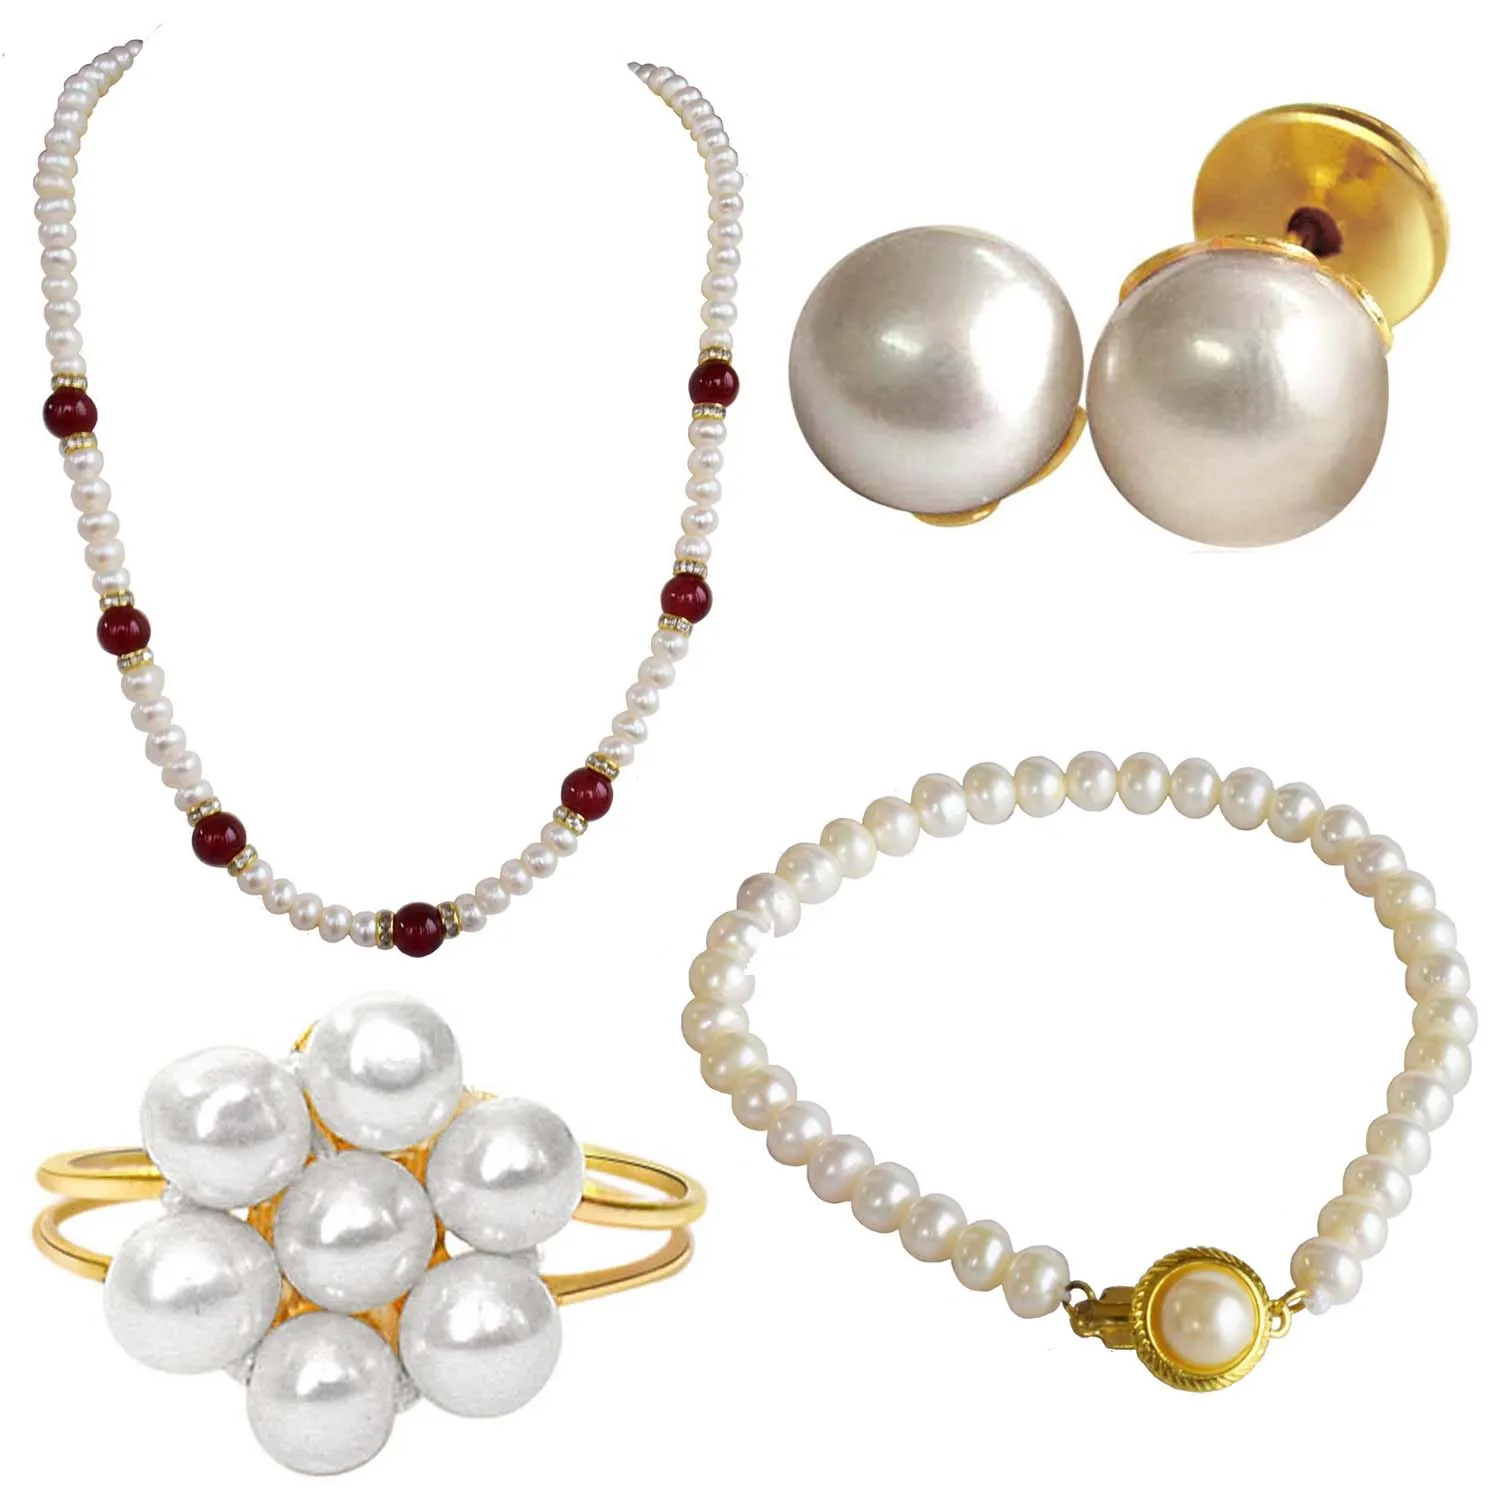 Single Line Real Pearl & Red Coloured Big Stone Necklace, Earrings, Ring, Bracelet Set (SN1029+Ring-1+SE65+SB75)